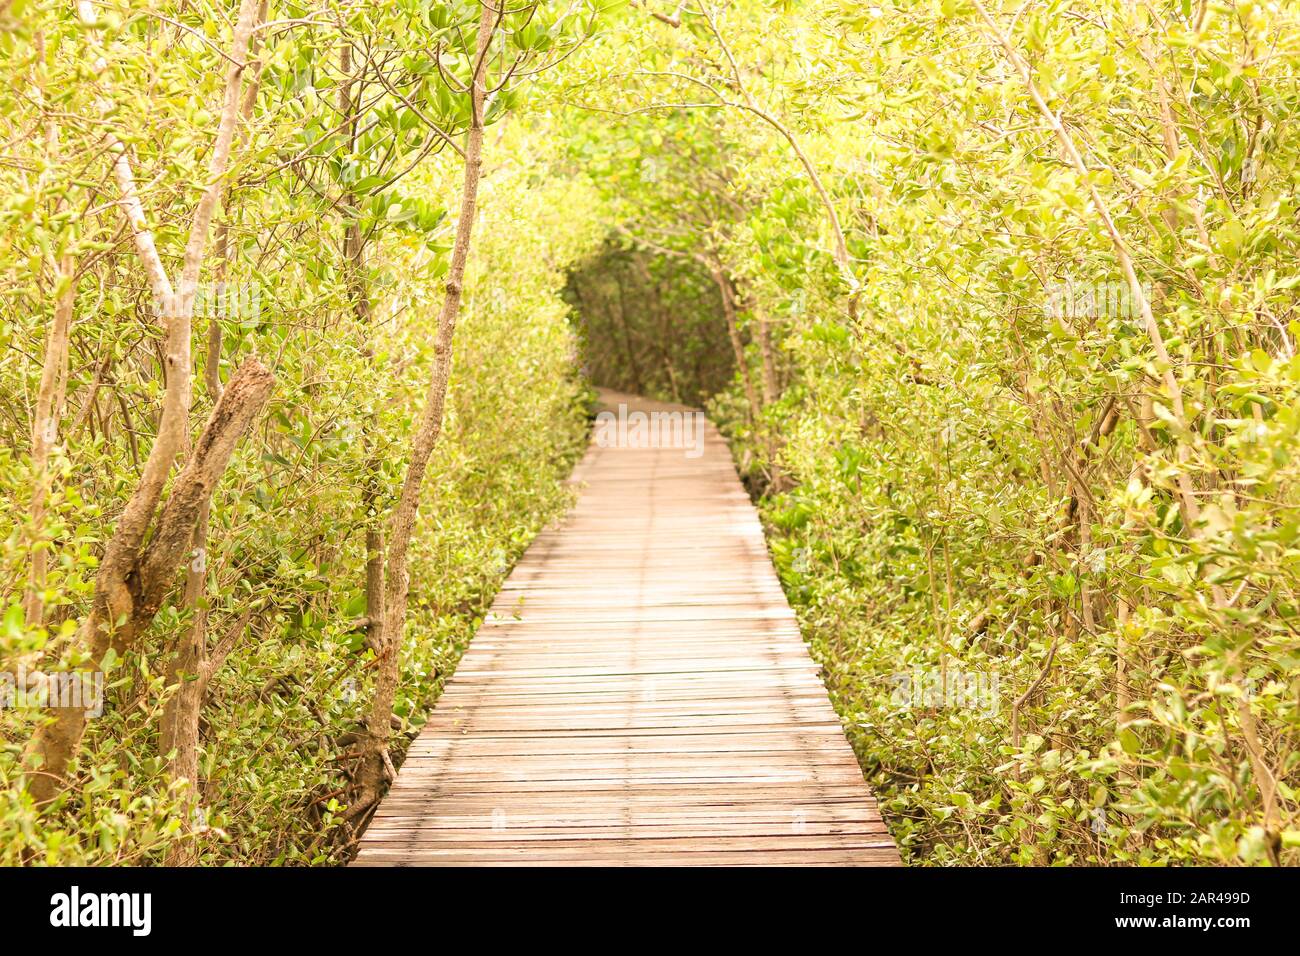 Wood floor walkways with tree tunnel. The pathway with two sides is a tree. Stock Photo